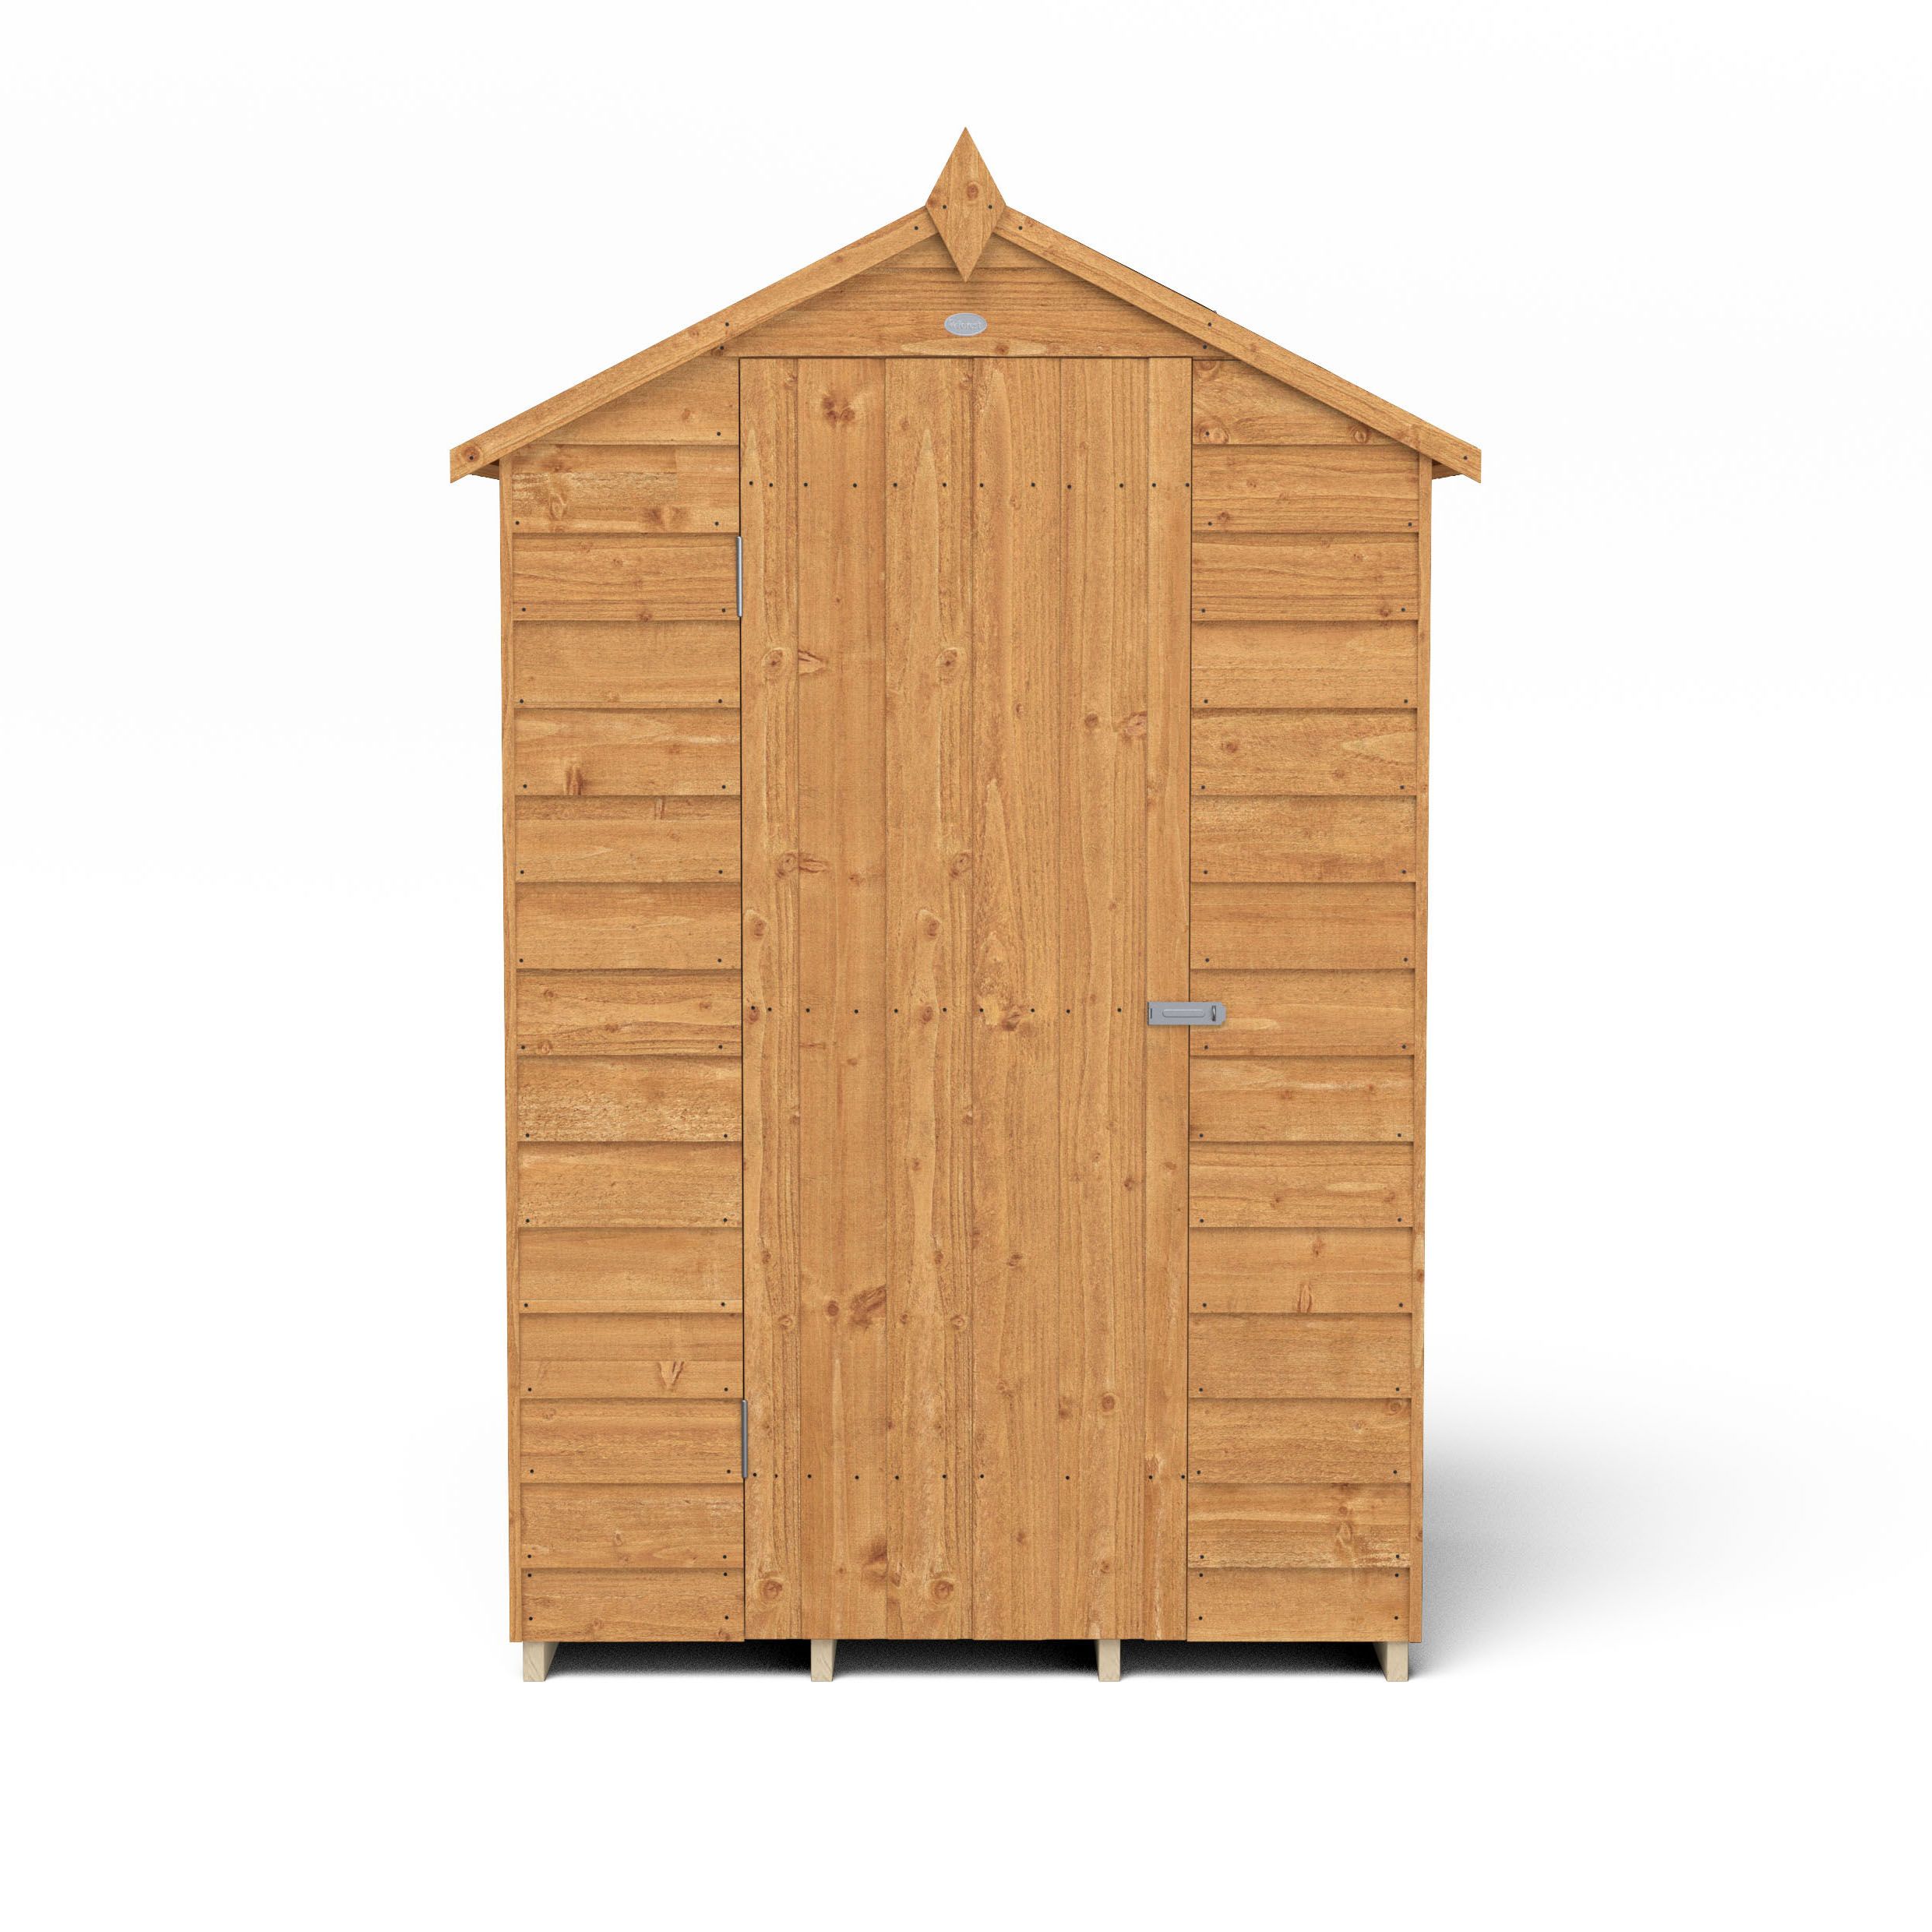 Forest Garden Overlap 4x3 ft Apex Wooden Shed with floor